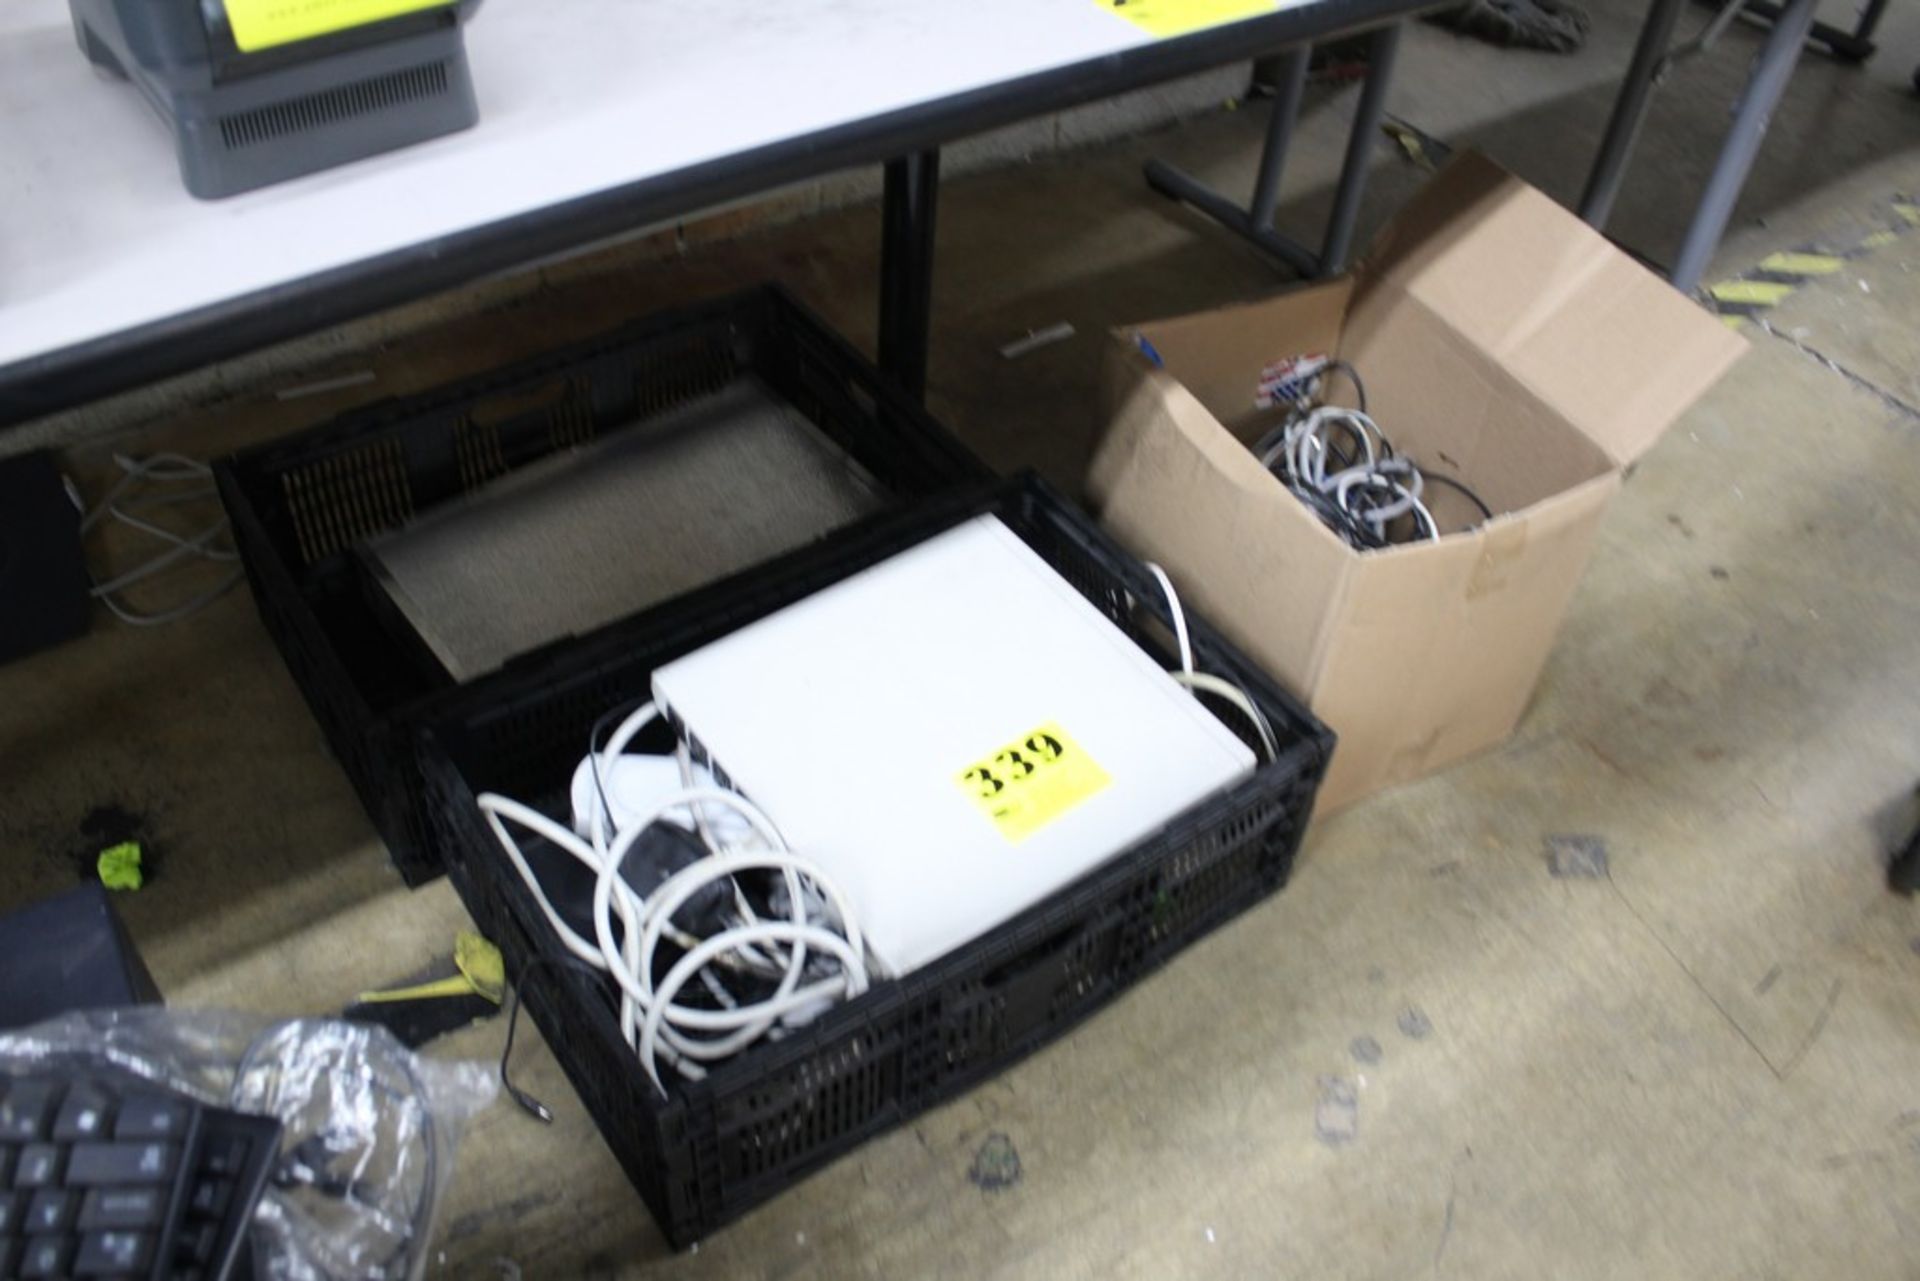 ASSORTED POWER STRIPS IN CRATE